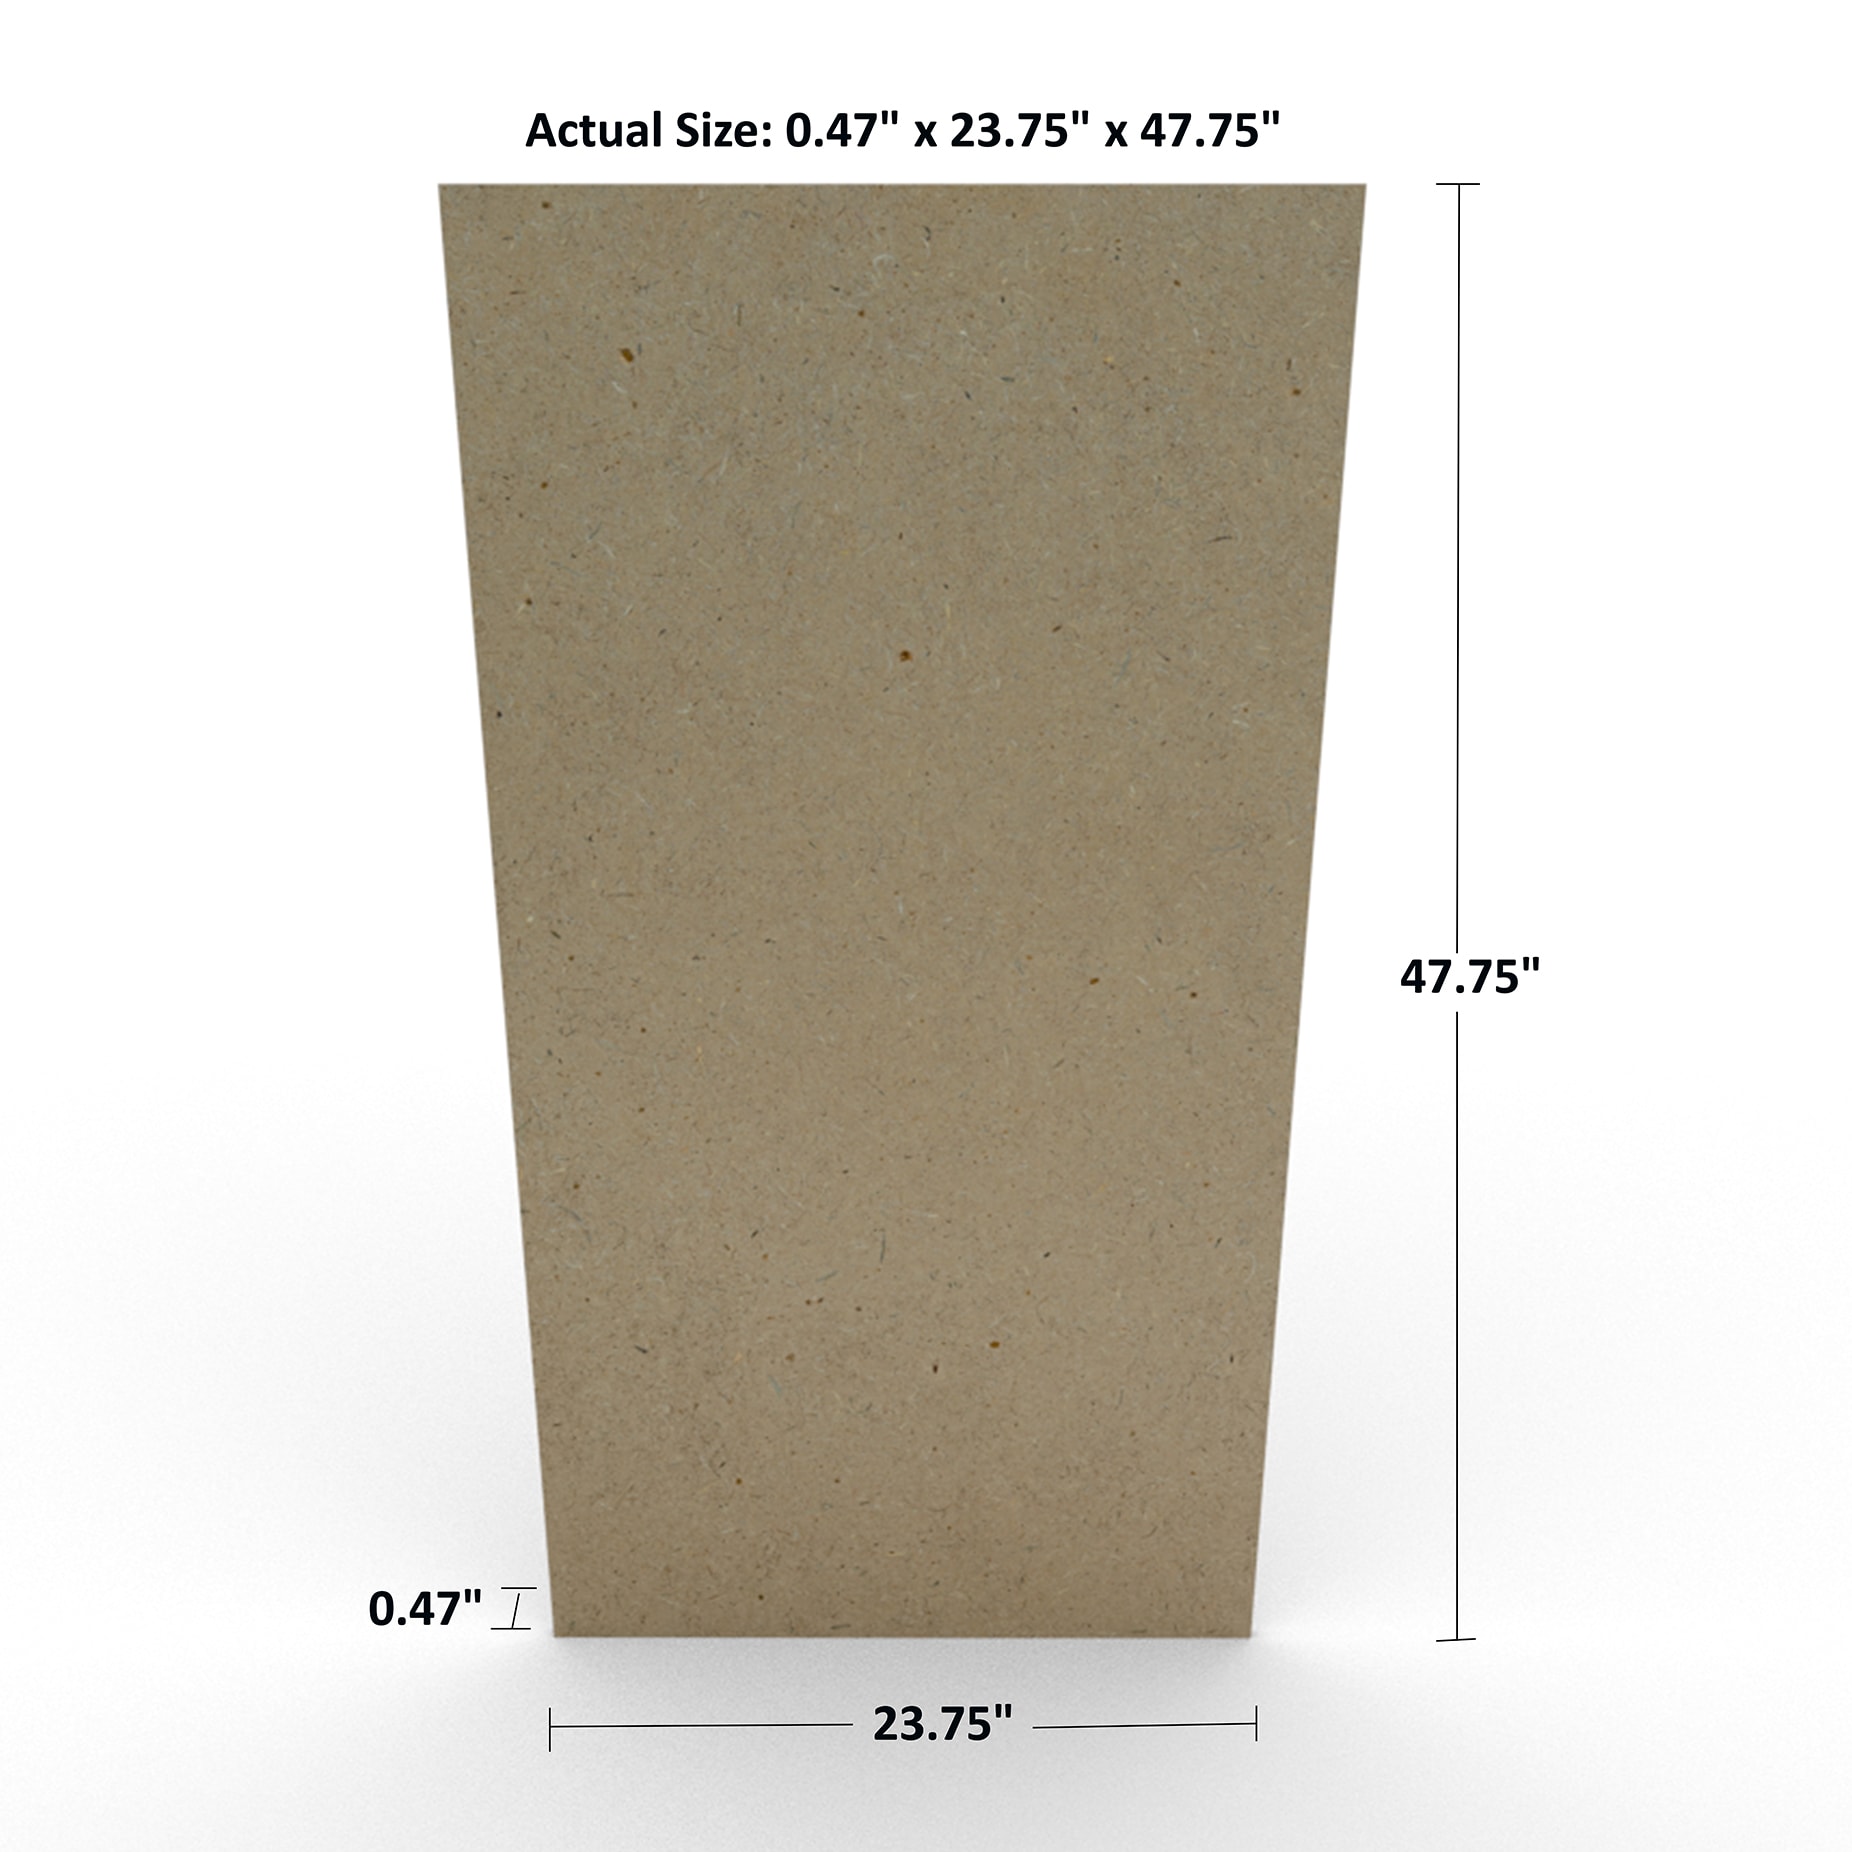 3/4-in x 4-ft x 8-ft Sanded MDF (Medium-Density Fiberboard) in the Plywood  & Sheathing department at